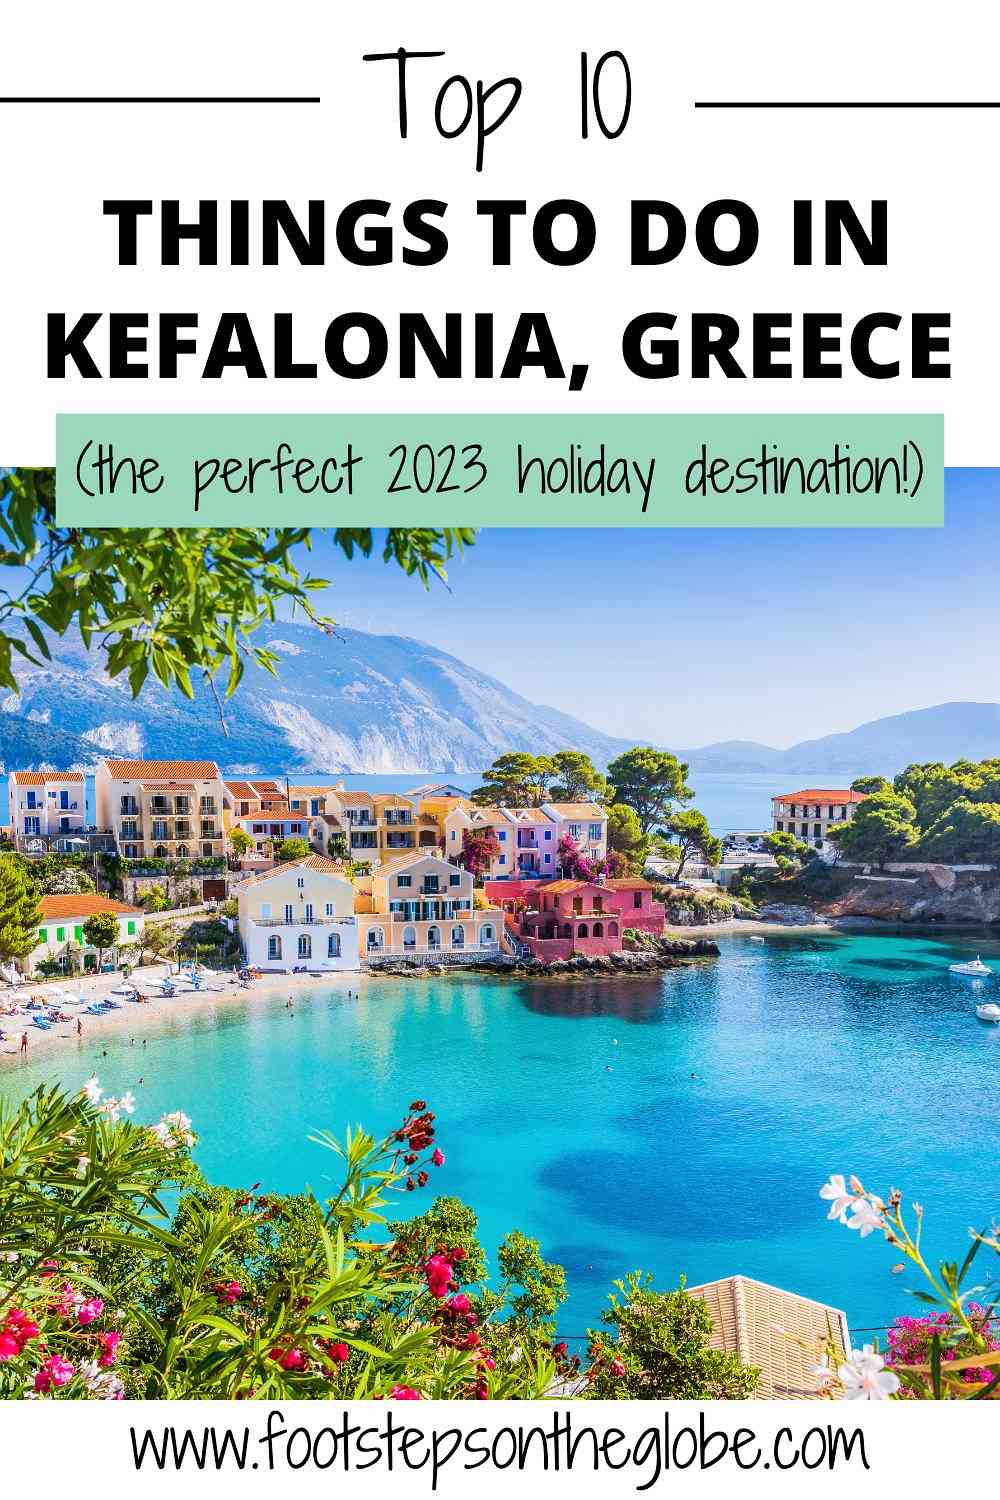 Assos Village with a small horse-shoe shaped harbour and colourful buildings dotted along the coast with flowers in the foreground with the text: "Top 10 things to do in Kefalonia, Greece (the perfect 2023 holiday destination!)" over the top pinterest image